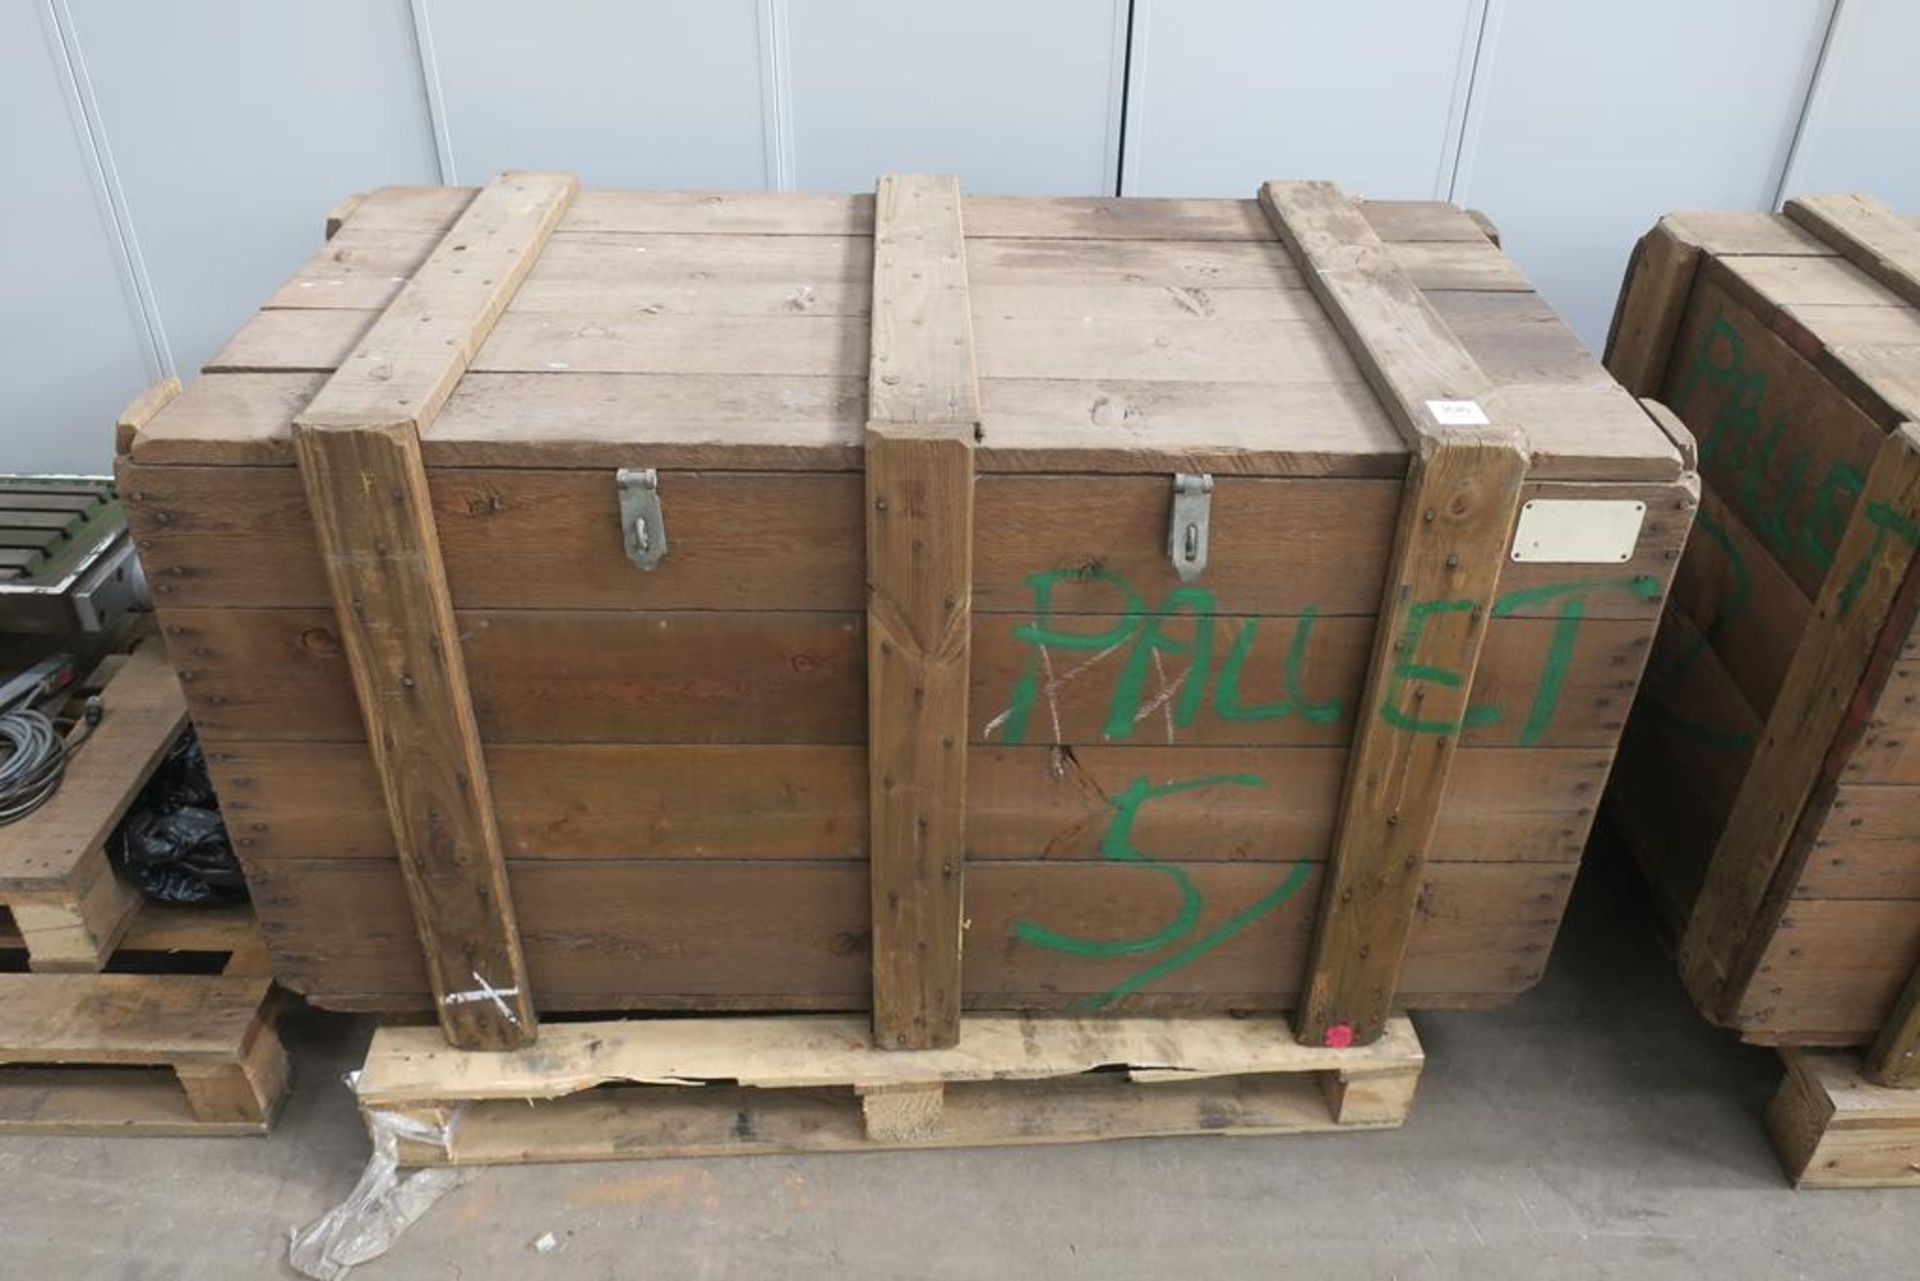 A Large Wooden Storage/Transport Box. Please note there is a £5 plus VAT lift out fee on this lot